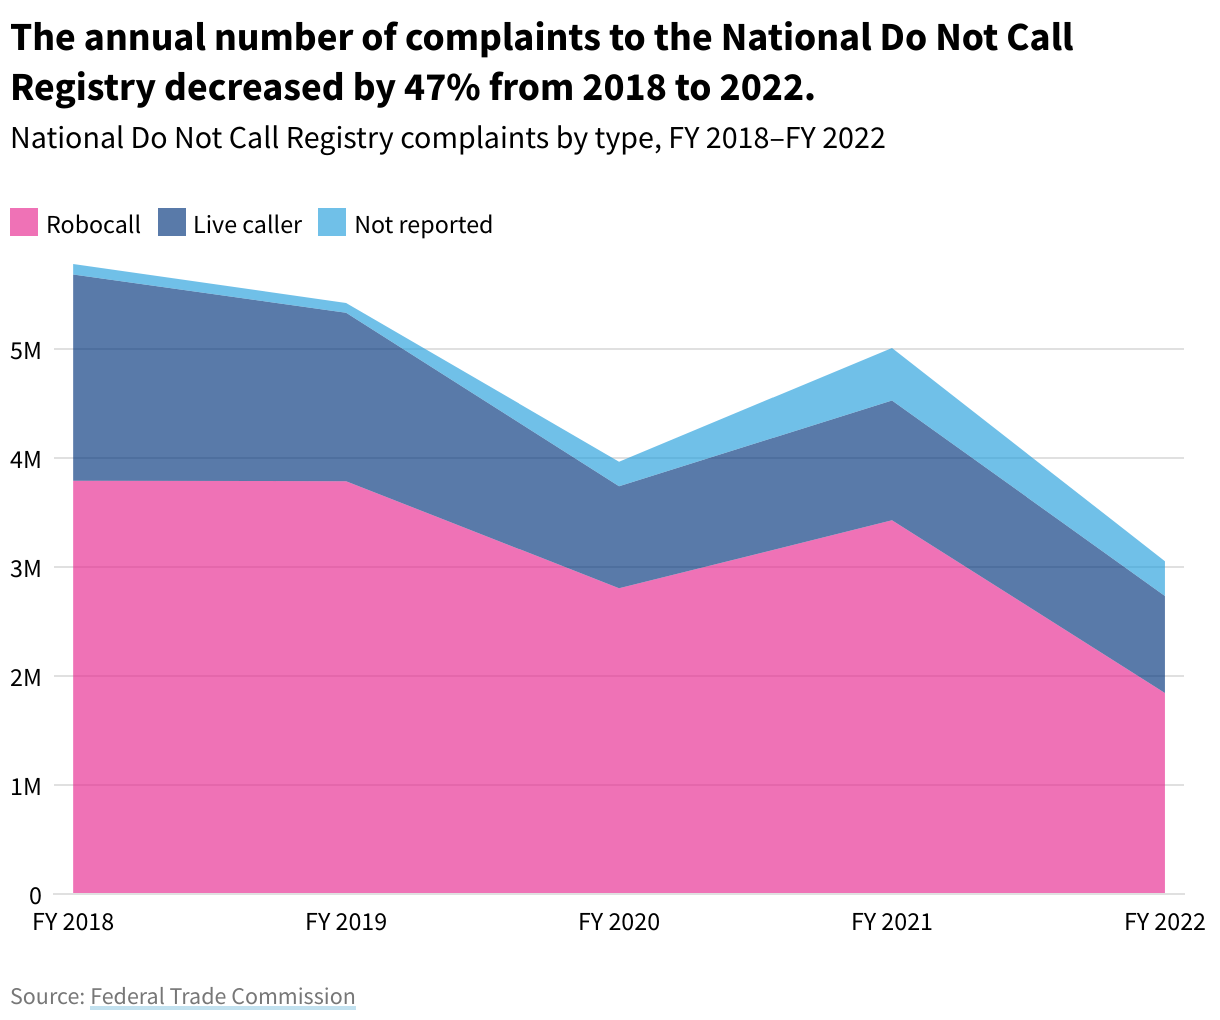 Area chart showing the annual number of complaints to the National Do Not Call Registry. The annual number of complaints to the National Do Not Call Registry decreased by 47% from 2018 to 2022.